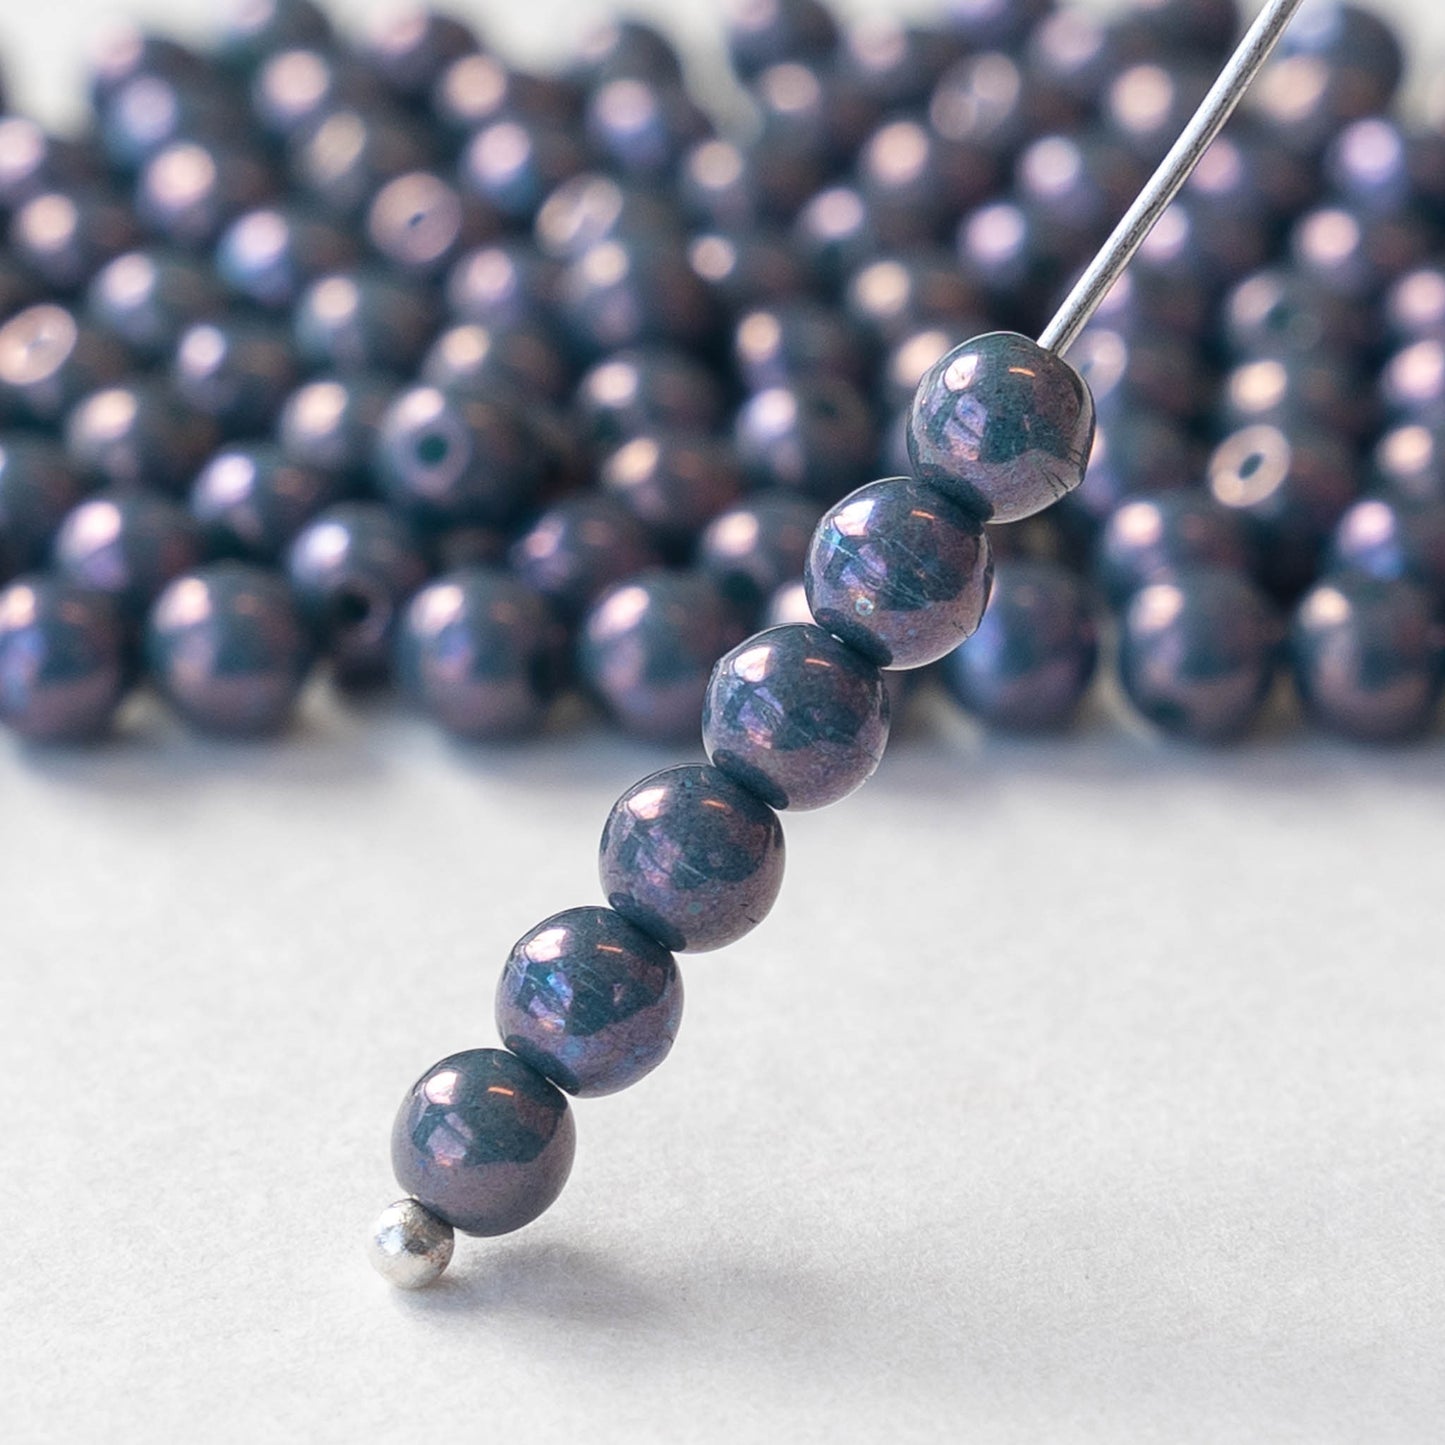 4mm Round Glass Beads - Blue with Purple Luster - 100 Beads